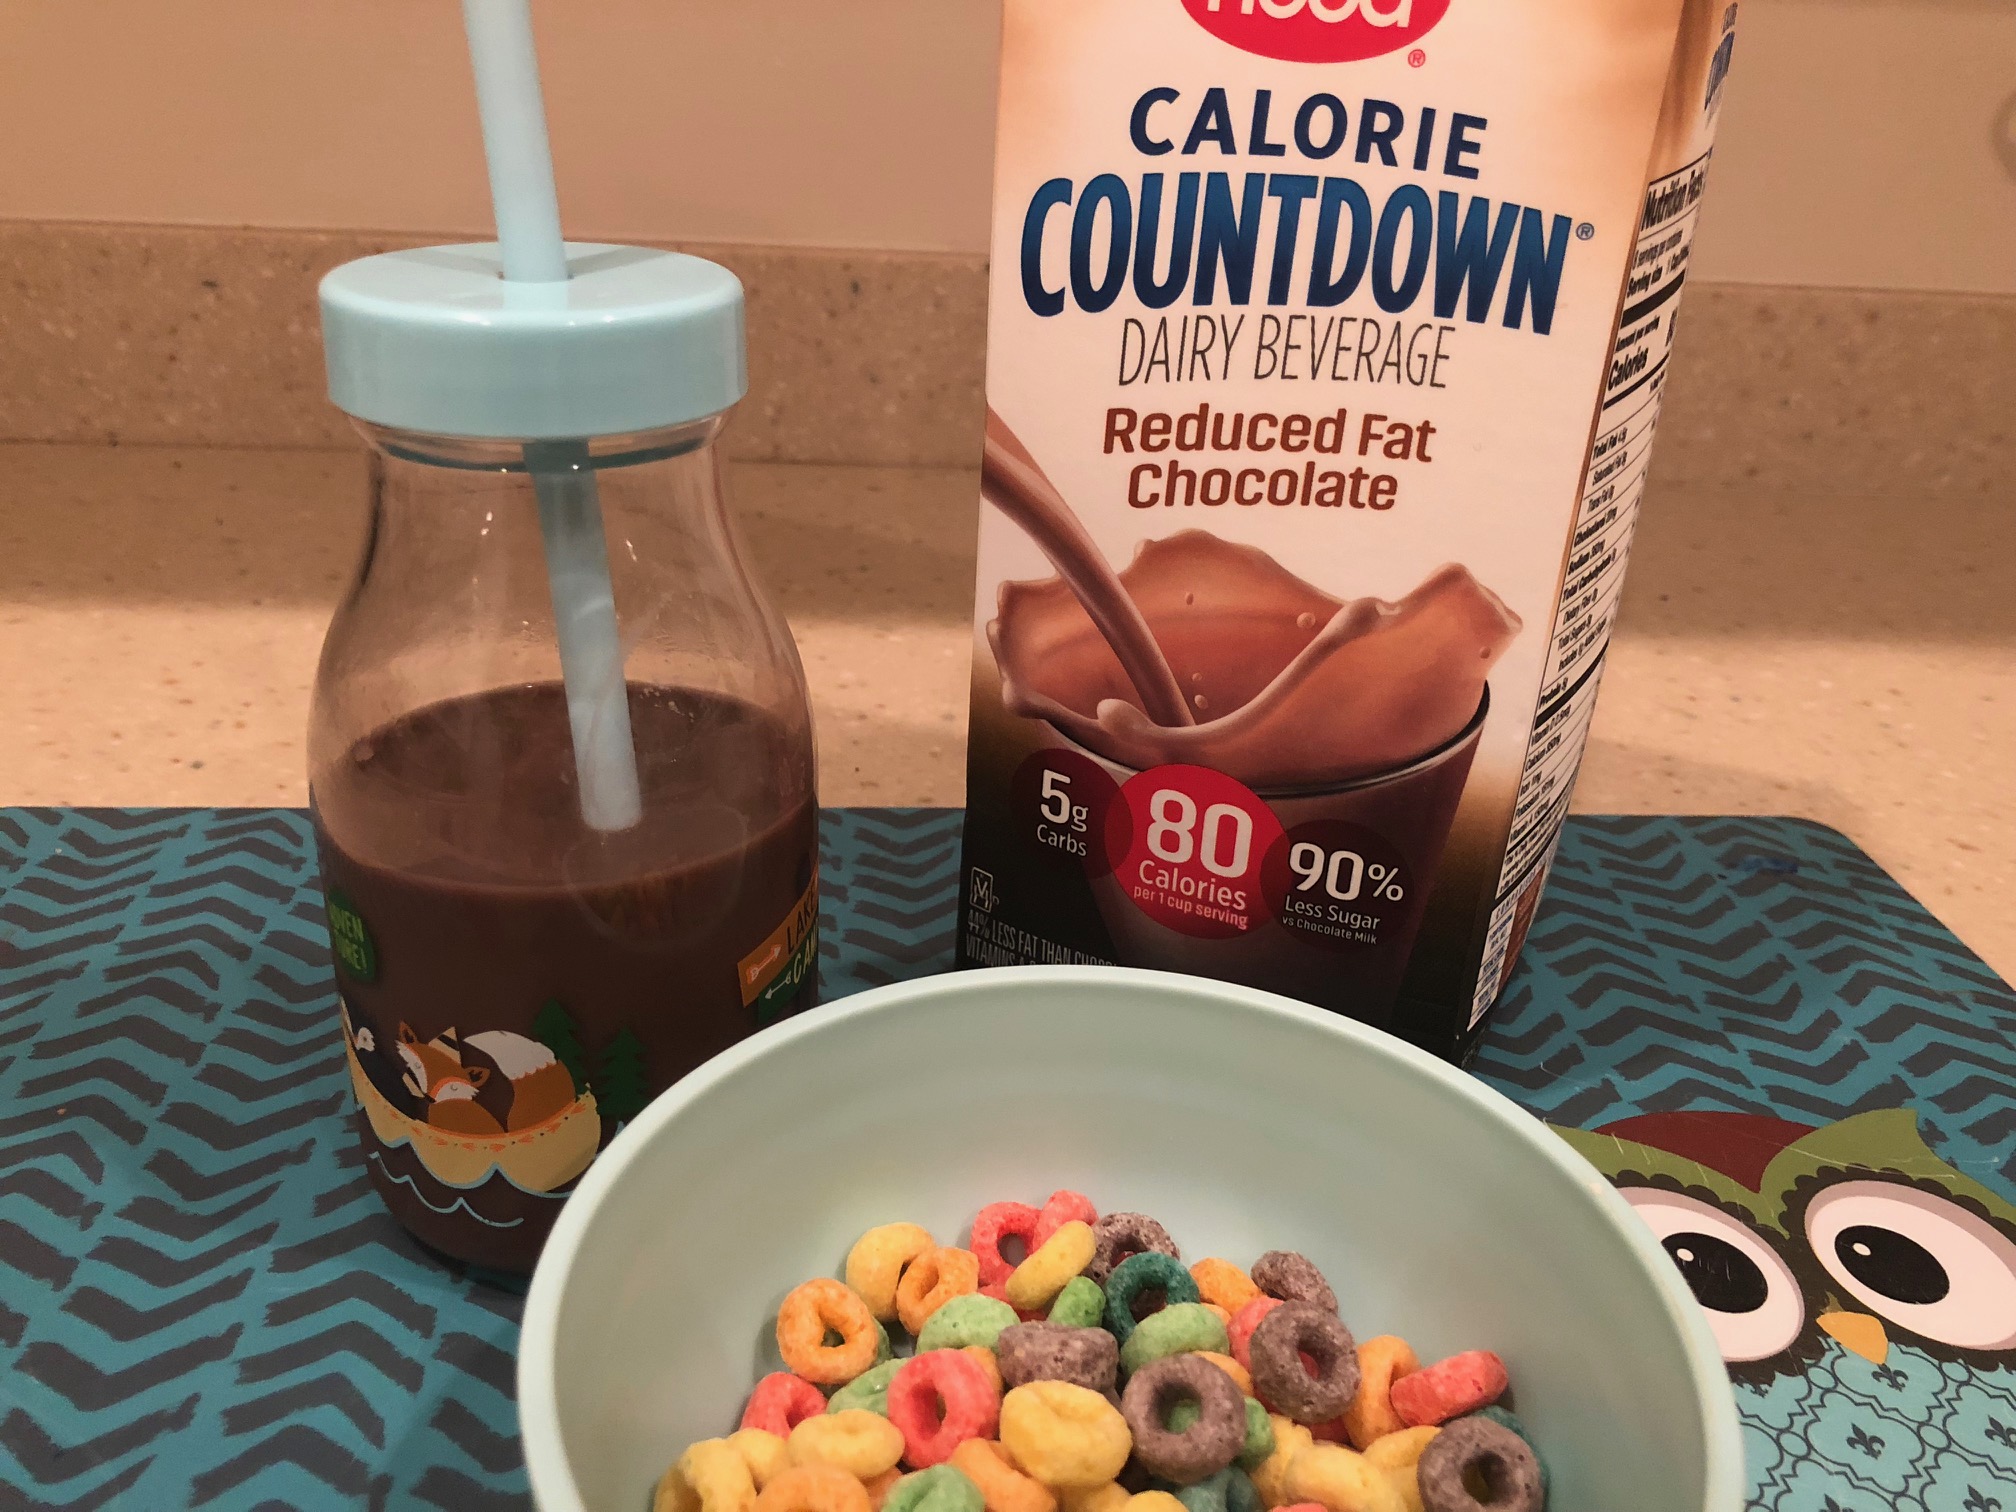 Milk substitute | Dairy beverage to replace milk with | Hood Calorie Countdown | Acupful.com | Family Lifestyle blogger Mandy Carter| healthy milk for kids | Hood Calorie Countdown